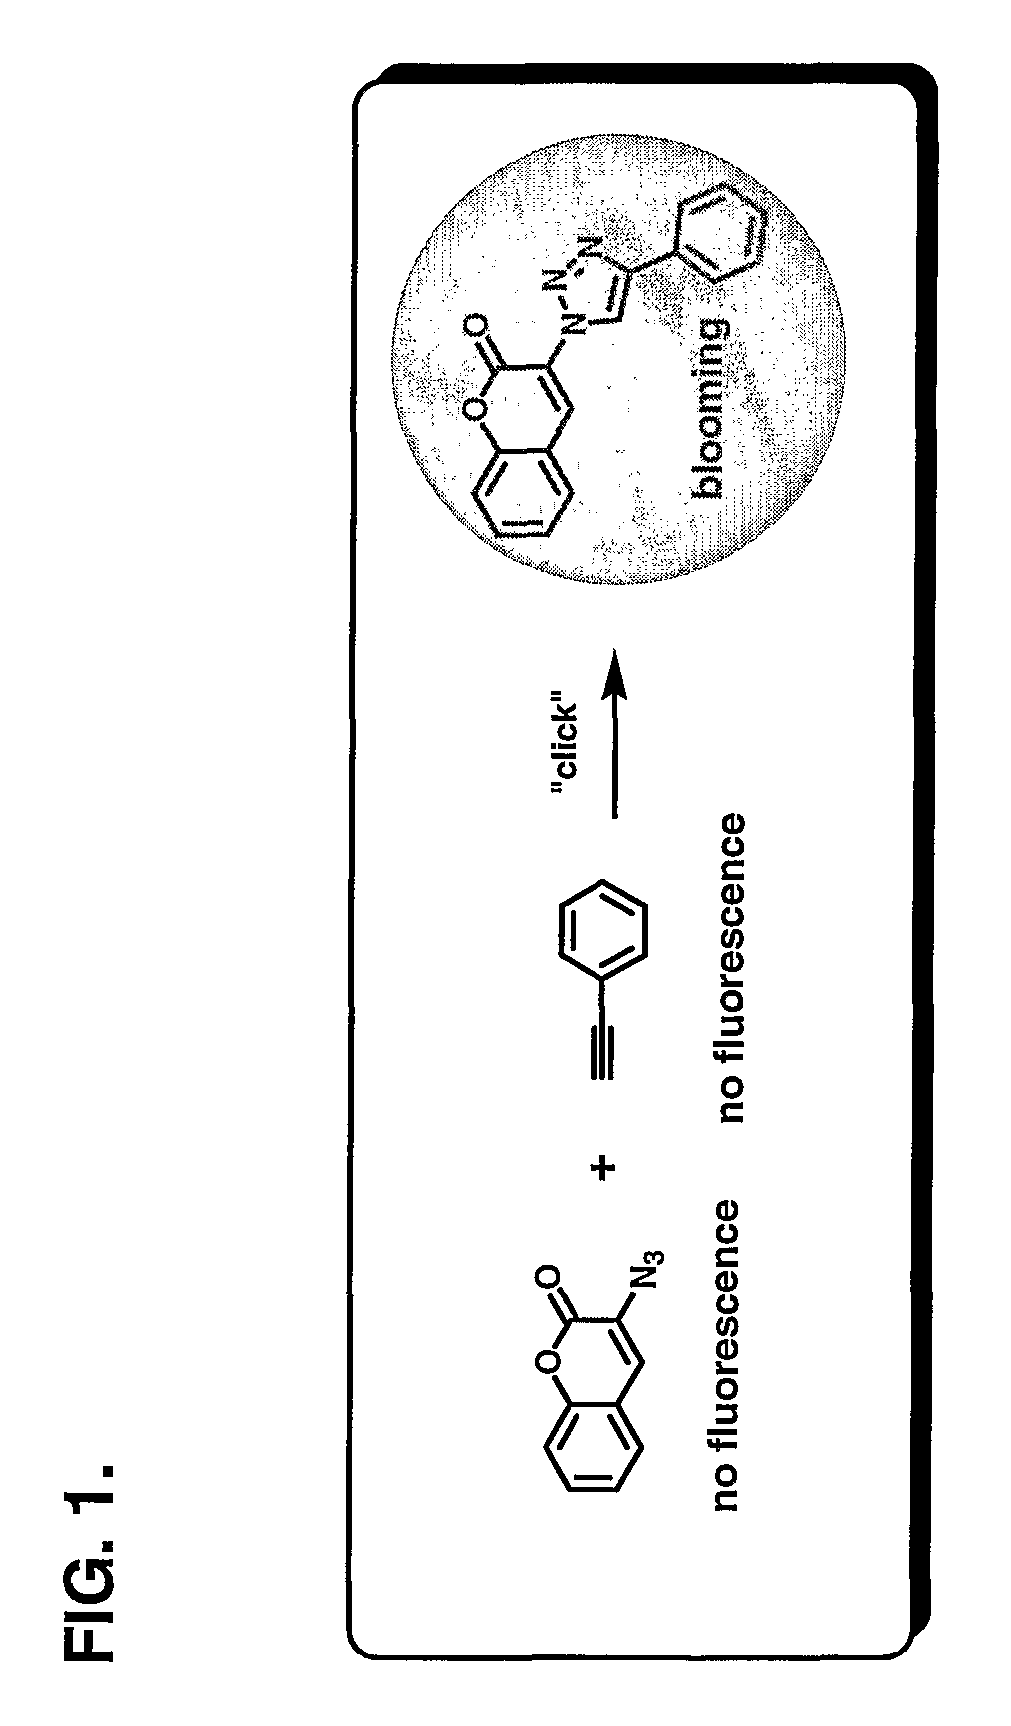 Chemoselective fluorgenic molecular linkers and methods for their preparation and use